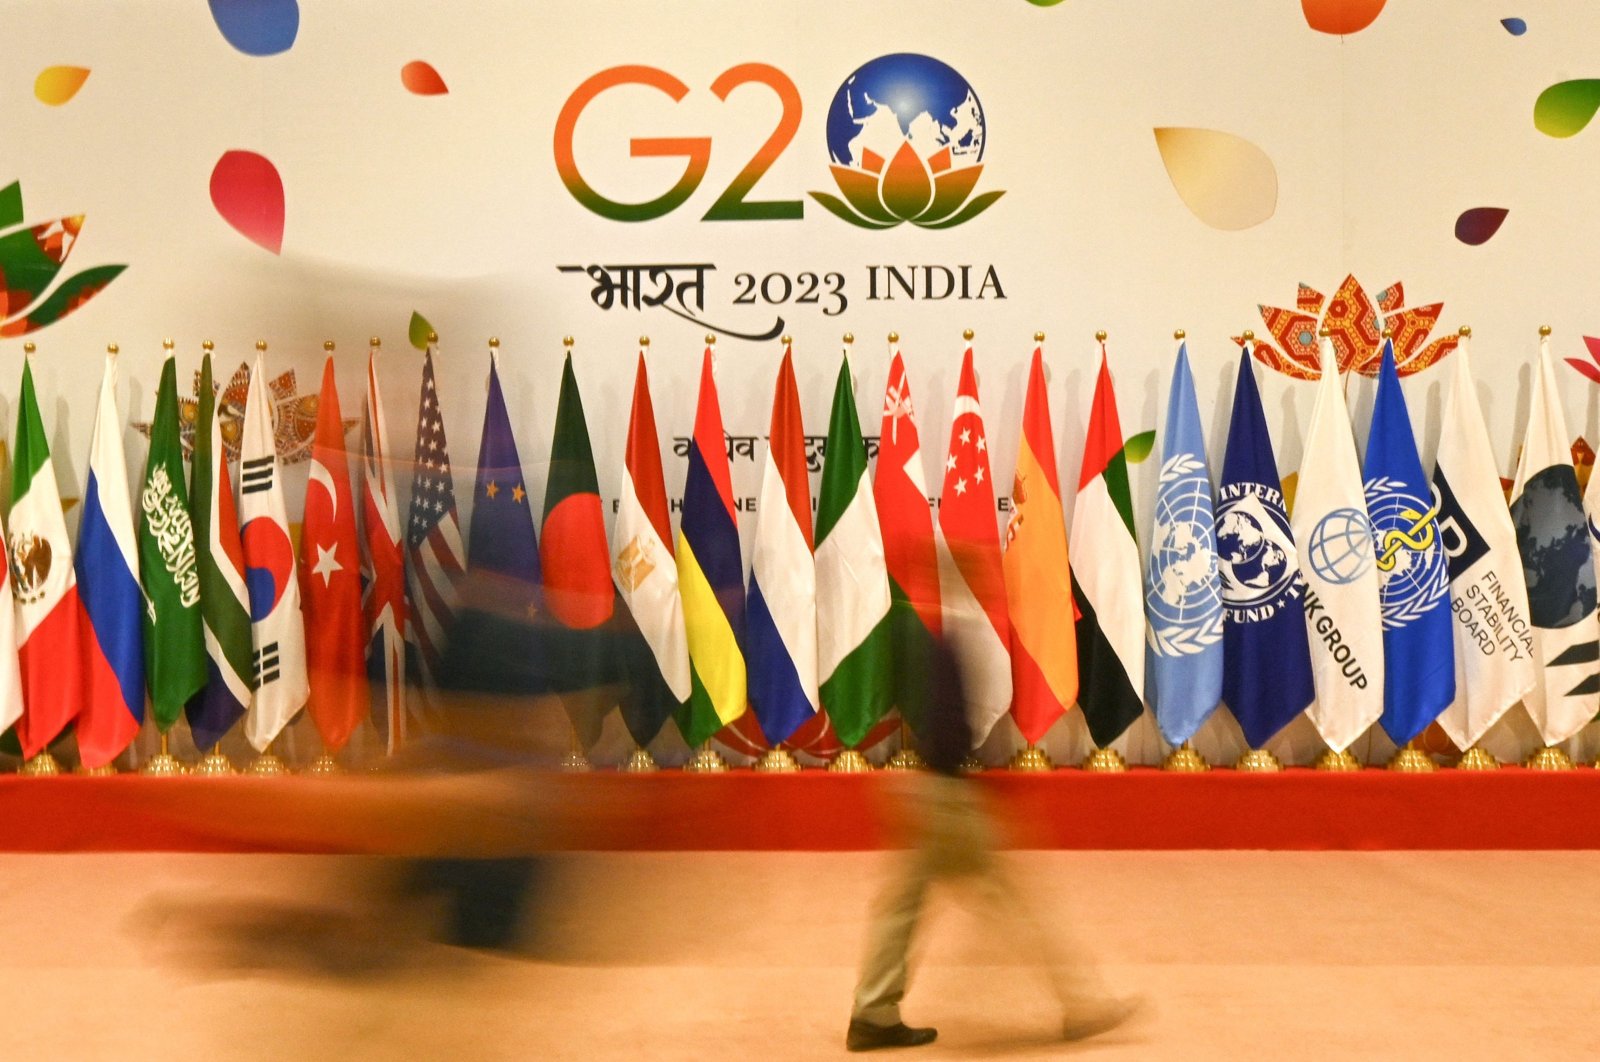 Flags of participating countries are pictured inside the International media centre at the G20 venue, days ahead of its commencement in New Delhi on September 7, 2023. (Photo by Money SHARMA / AFP)